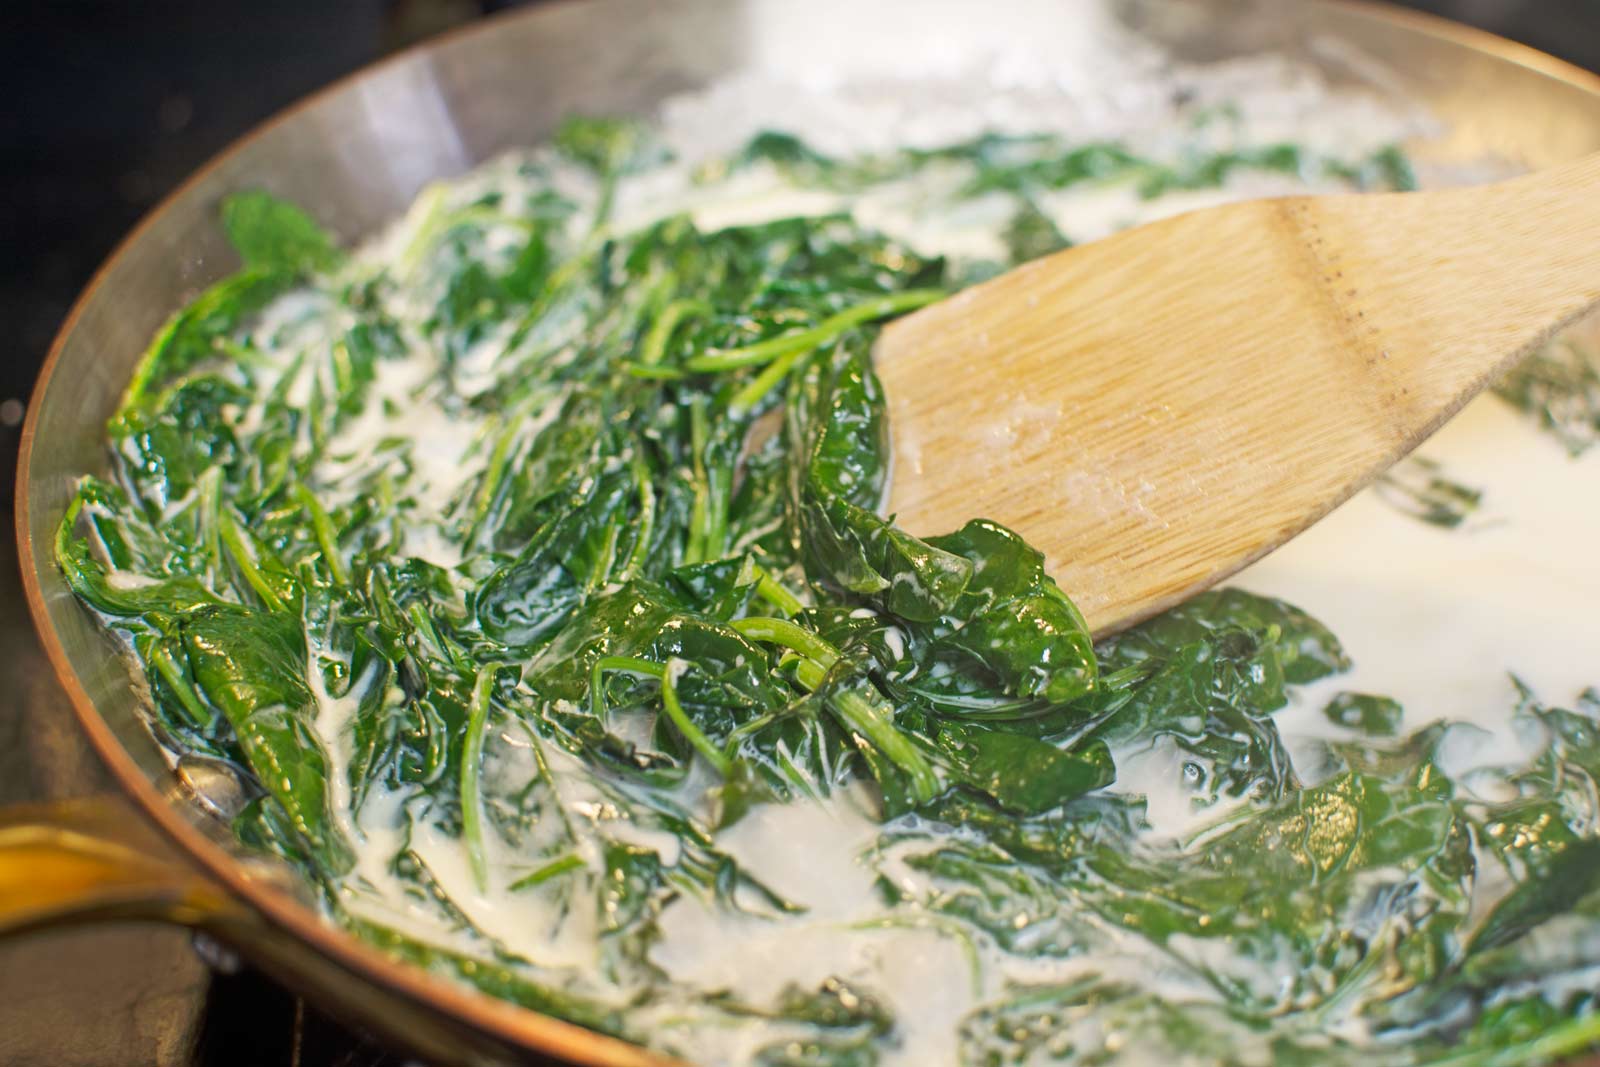 Incredibly yummy baby Kale cooking in cream - Find out more how to make Baked Eggs in this oh so Creamy Kale @LittleFiggyFood 